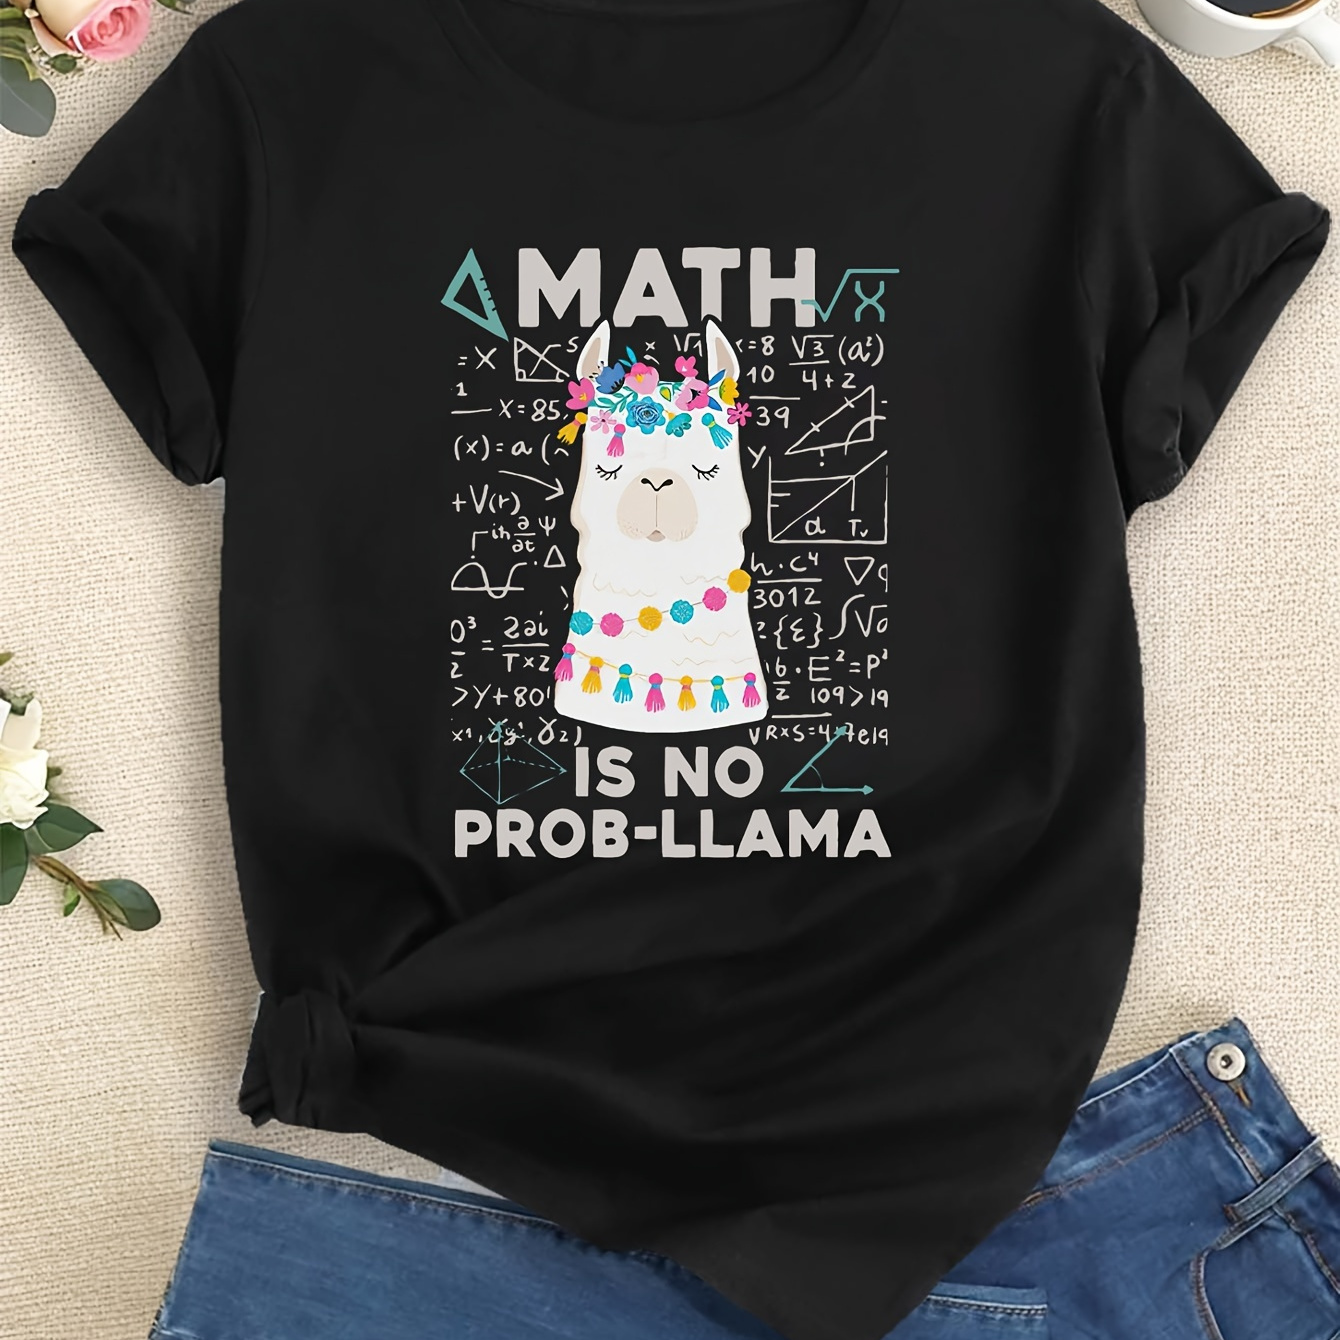 

Number Alpaca Math Print T-shirt, Short Sleeve Crew Neck Casual Top For Summer & Spring, Women's Clothing